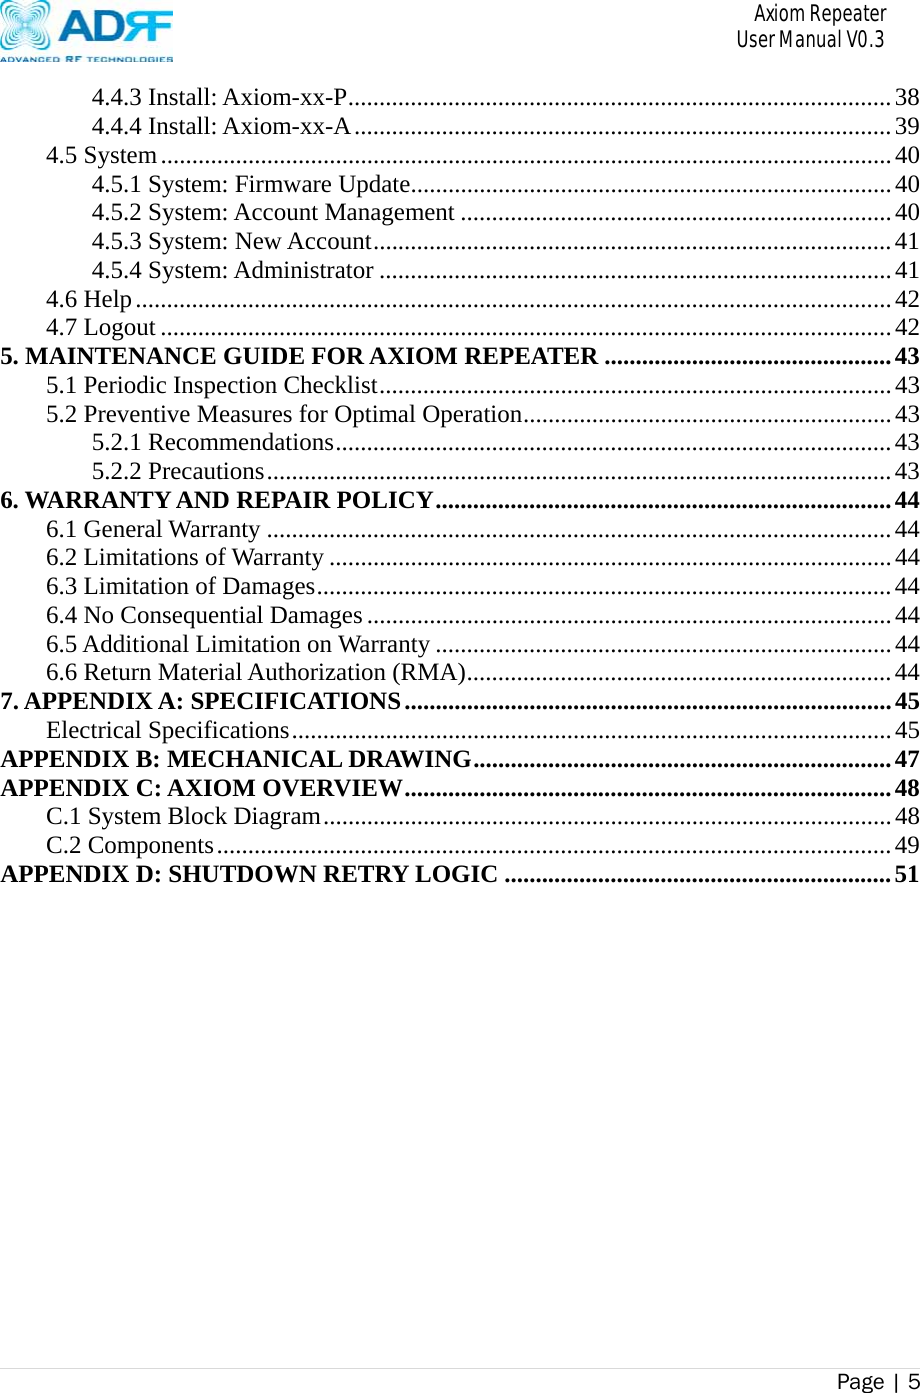       Axiom Repeater     User Manual V0.3 Page | 5    4.4.3 Install: Axiom-xx-P ....................................................................................... 384.4.4 Install: Axiom-xx-A ...................................................................................... 394.5 System ..................................................................................................................... 404.5.1 System: Firmware Update............................................................................. 404.5.2 System: Account Management ..................................................................... 404.5.3 System: New Account ................................................................................... 414.5.4 System: Administrator .................................................................................. 414.6 Help ......................................................................................................................... 424.7 Logout ..................................................................................................................... 425. MAINTENANCE GUIDE FOR AXIOM REPEATER .............................................. 435.1 Periodic Inspection Checklist .................................................................................. 435.2 Preventive Measures for Optimal Operation ........................................................... 435.2.1 Recommendations ......................................................................................... 435.2.2 Precautions .................................................................................................... 436. WARRANTY AND REPAIR POLICY ......................................................................... 446.1 General Warranty .................................................................................................... 446.2 Limitations of Warranty .......................................................................................... 446.3 Limitation of Damages ............................................................................................ 446.4 No Consequential Damages .................................................................................... 446.5 Additional Limitation on Warranty ......................................................................... 446.6 Return Material Authorization (RMA) .................................................................... 447. APPENDIX A: SPECIFICATIONS .............................................................................. 45Electrical Specifications ................................................................................................ 45APPENDIX B: MECHANICAL DRAWING ................................................................... 47APPENDIX C: AXIOM OVERVIEW .............................................................................. 48C.1 System Block Diagram ........................................................................................... 48C.2 Components ............................................................................................................ 49APPENDIX D: SHUTDOWN RETRY LOGIC .............................................................. 51 